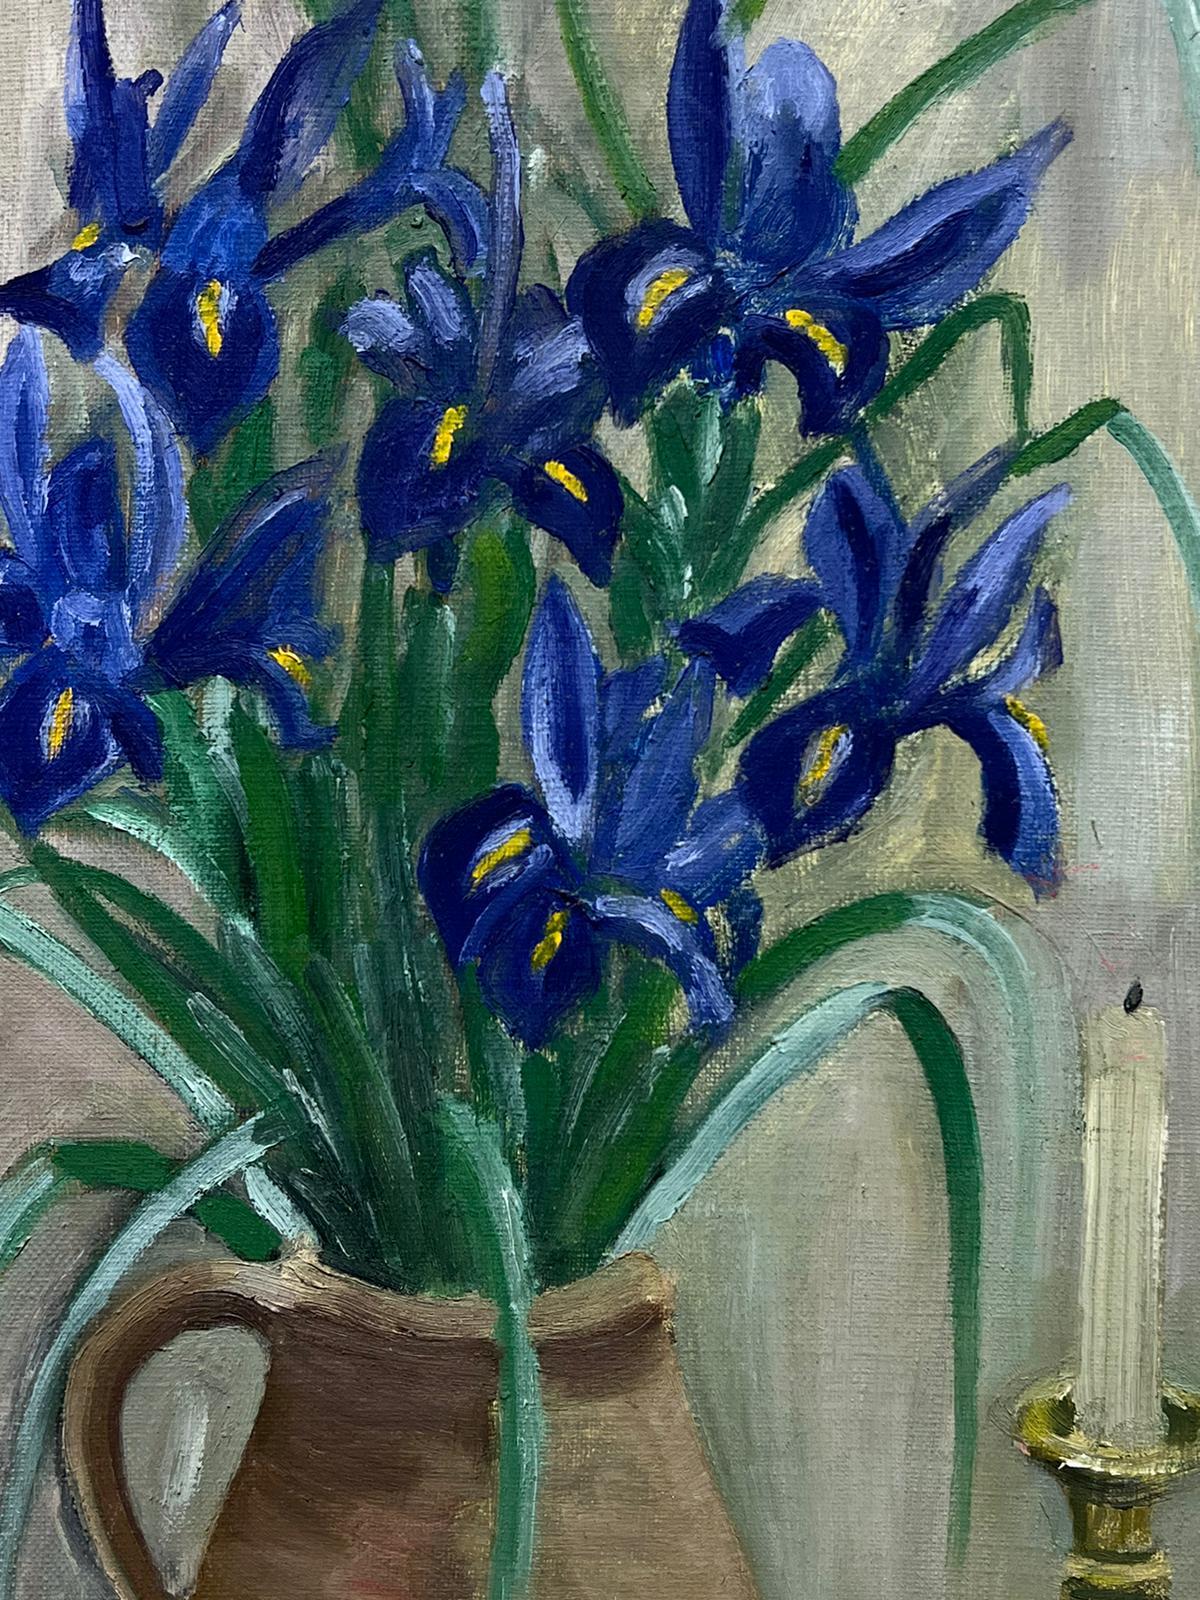 Mid 20th Century French Oil Painting Iris Flowers in Vase Still Life Interior For Sale 1